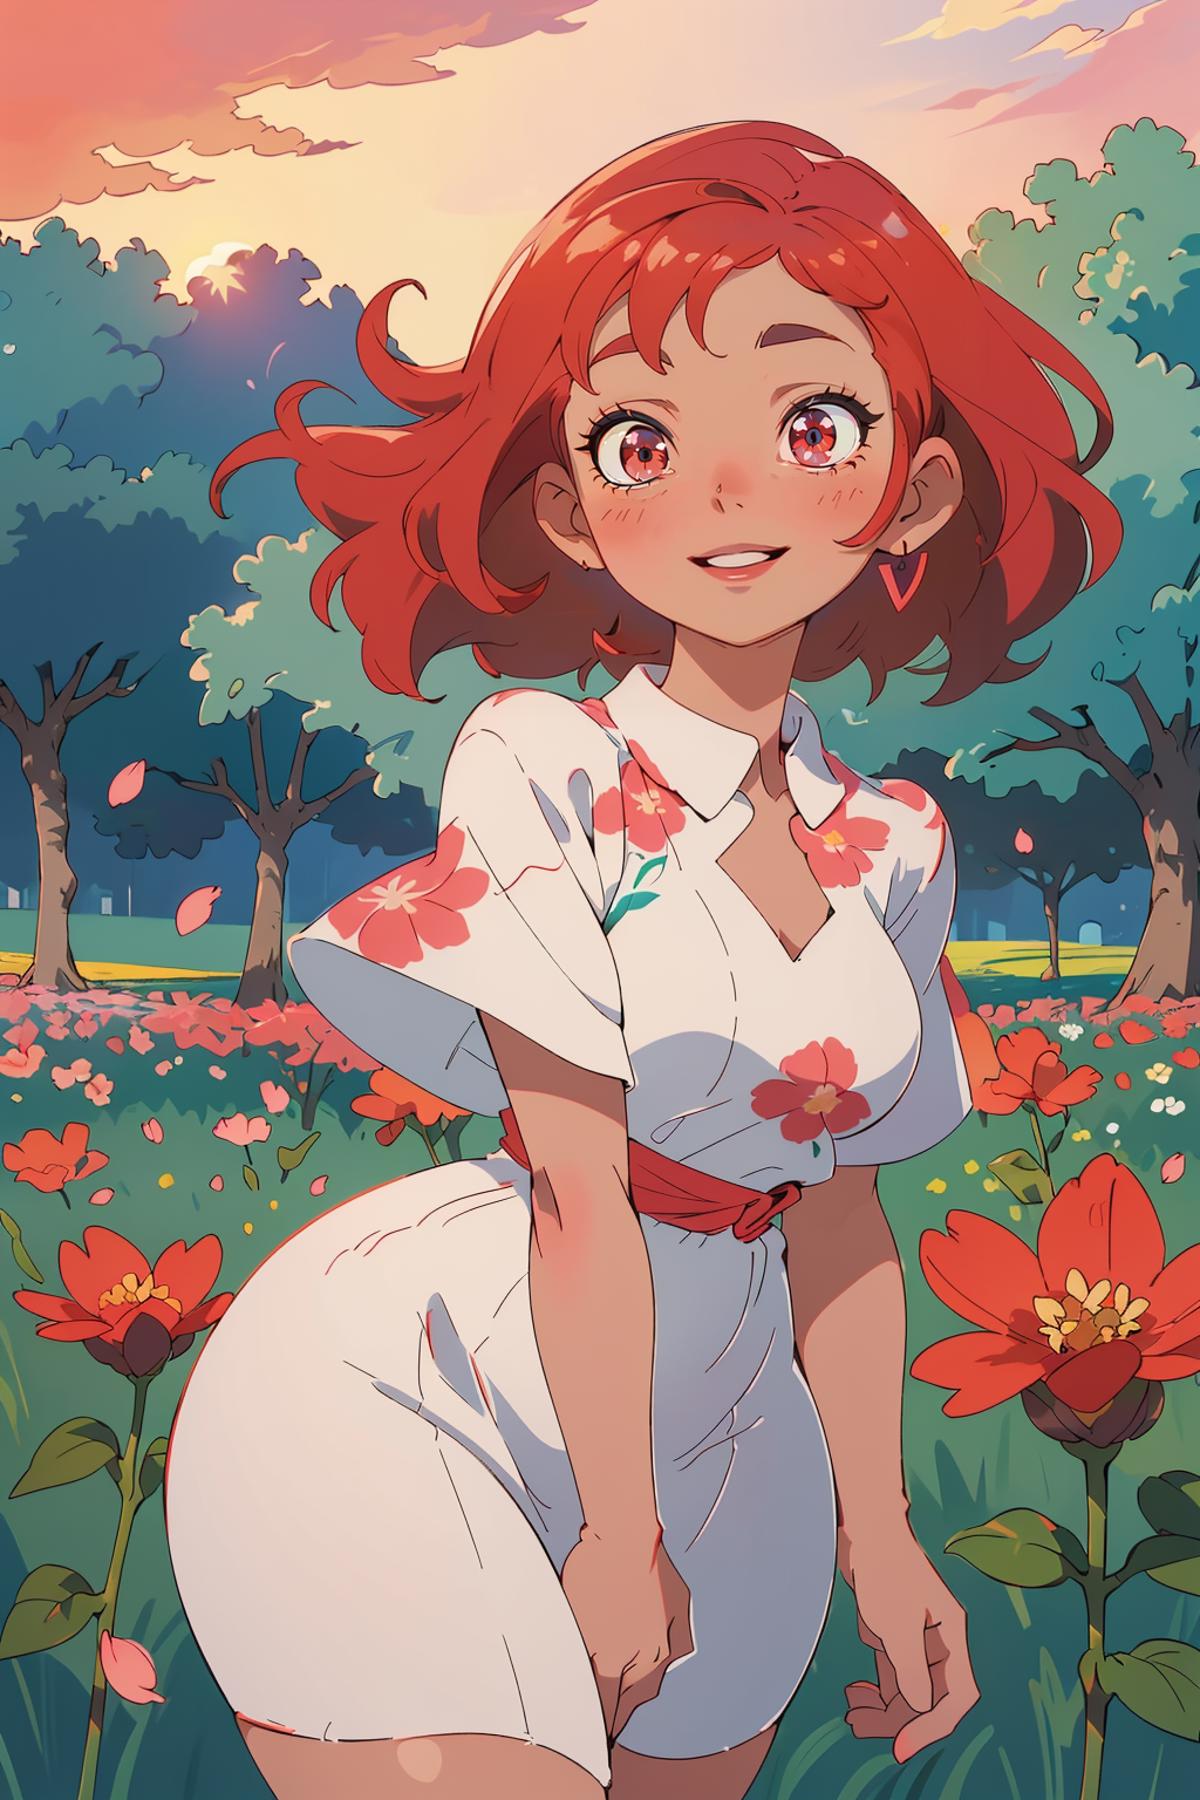 A cartoon girl wearing a white dress with a red bow is standing in a field of flowers.